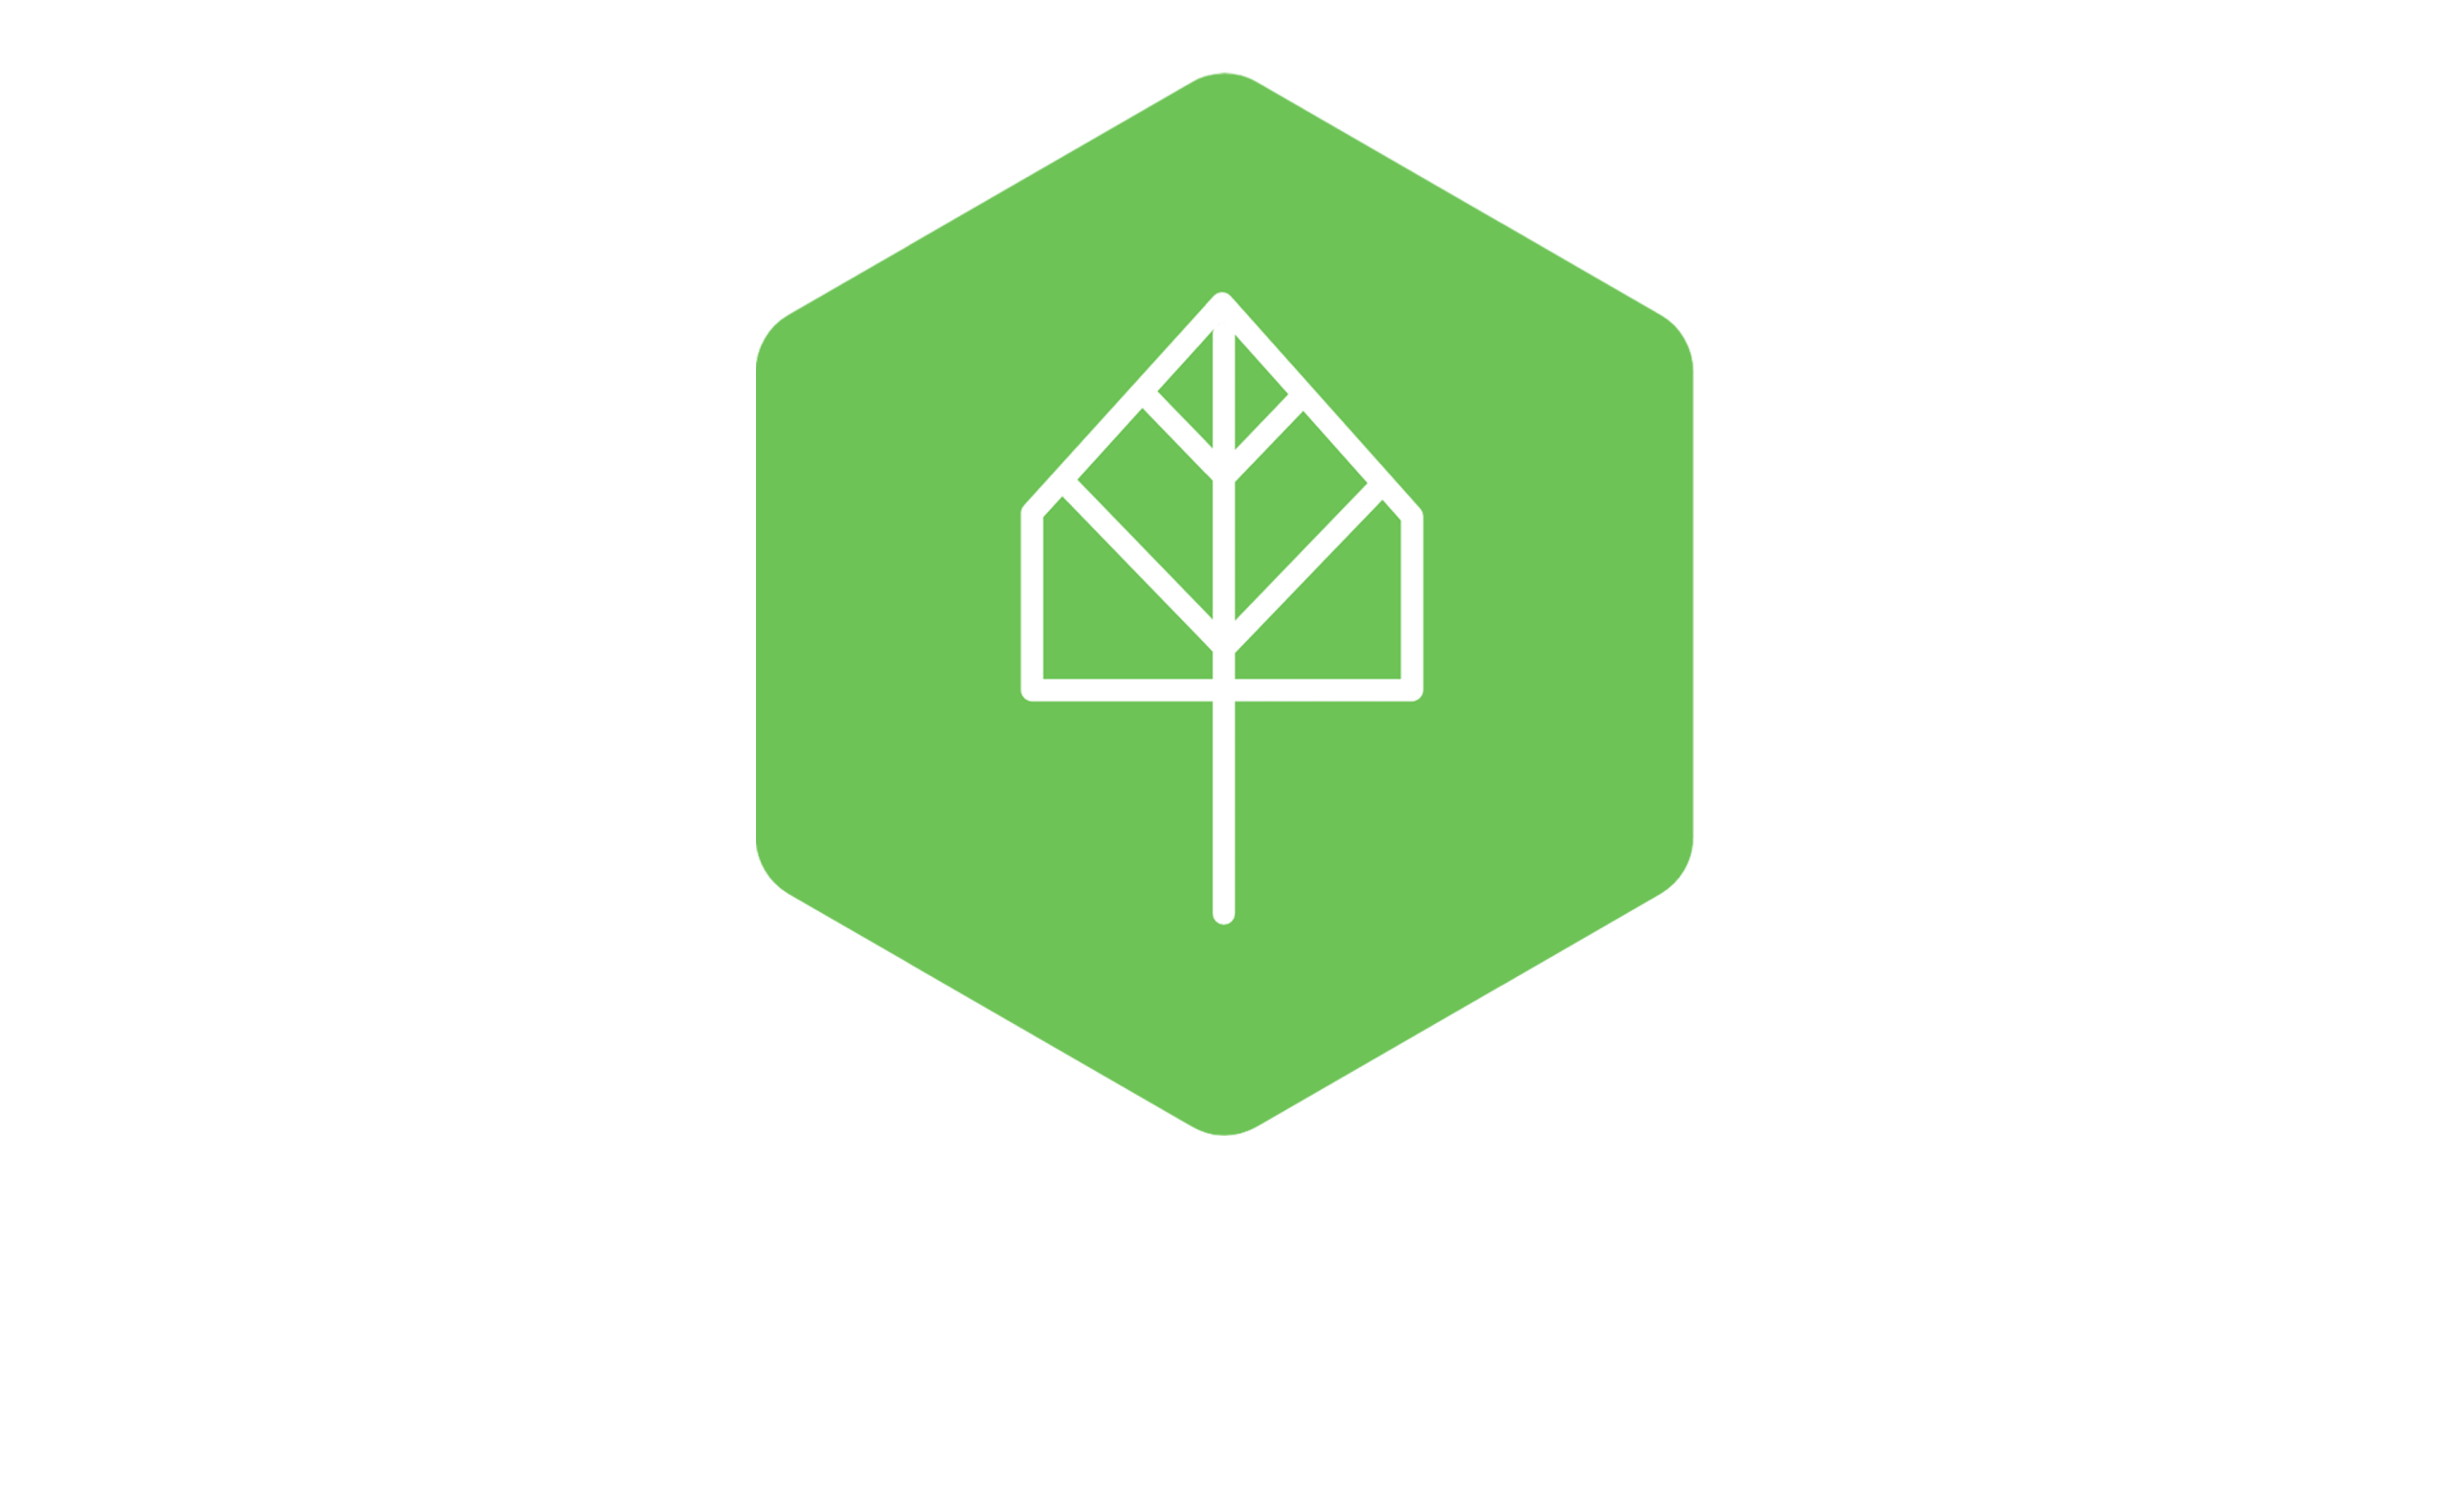 doncwoods.be